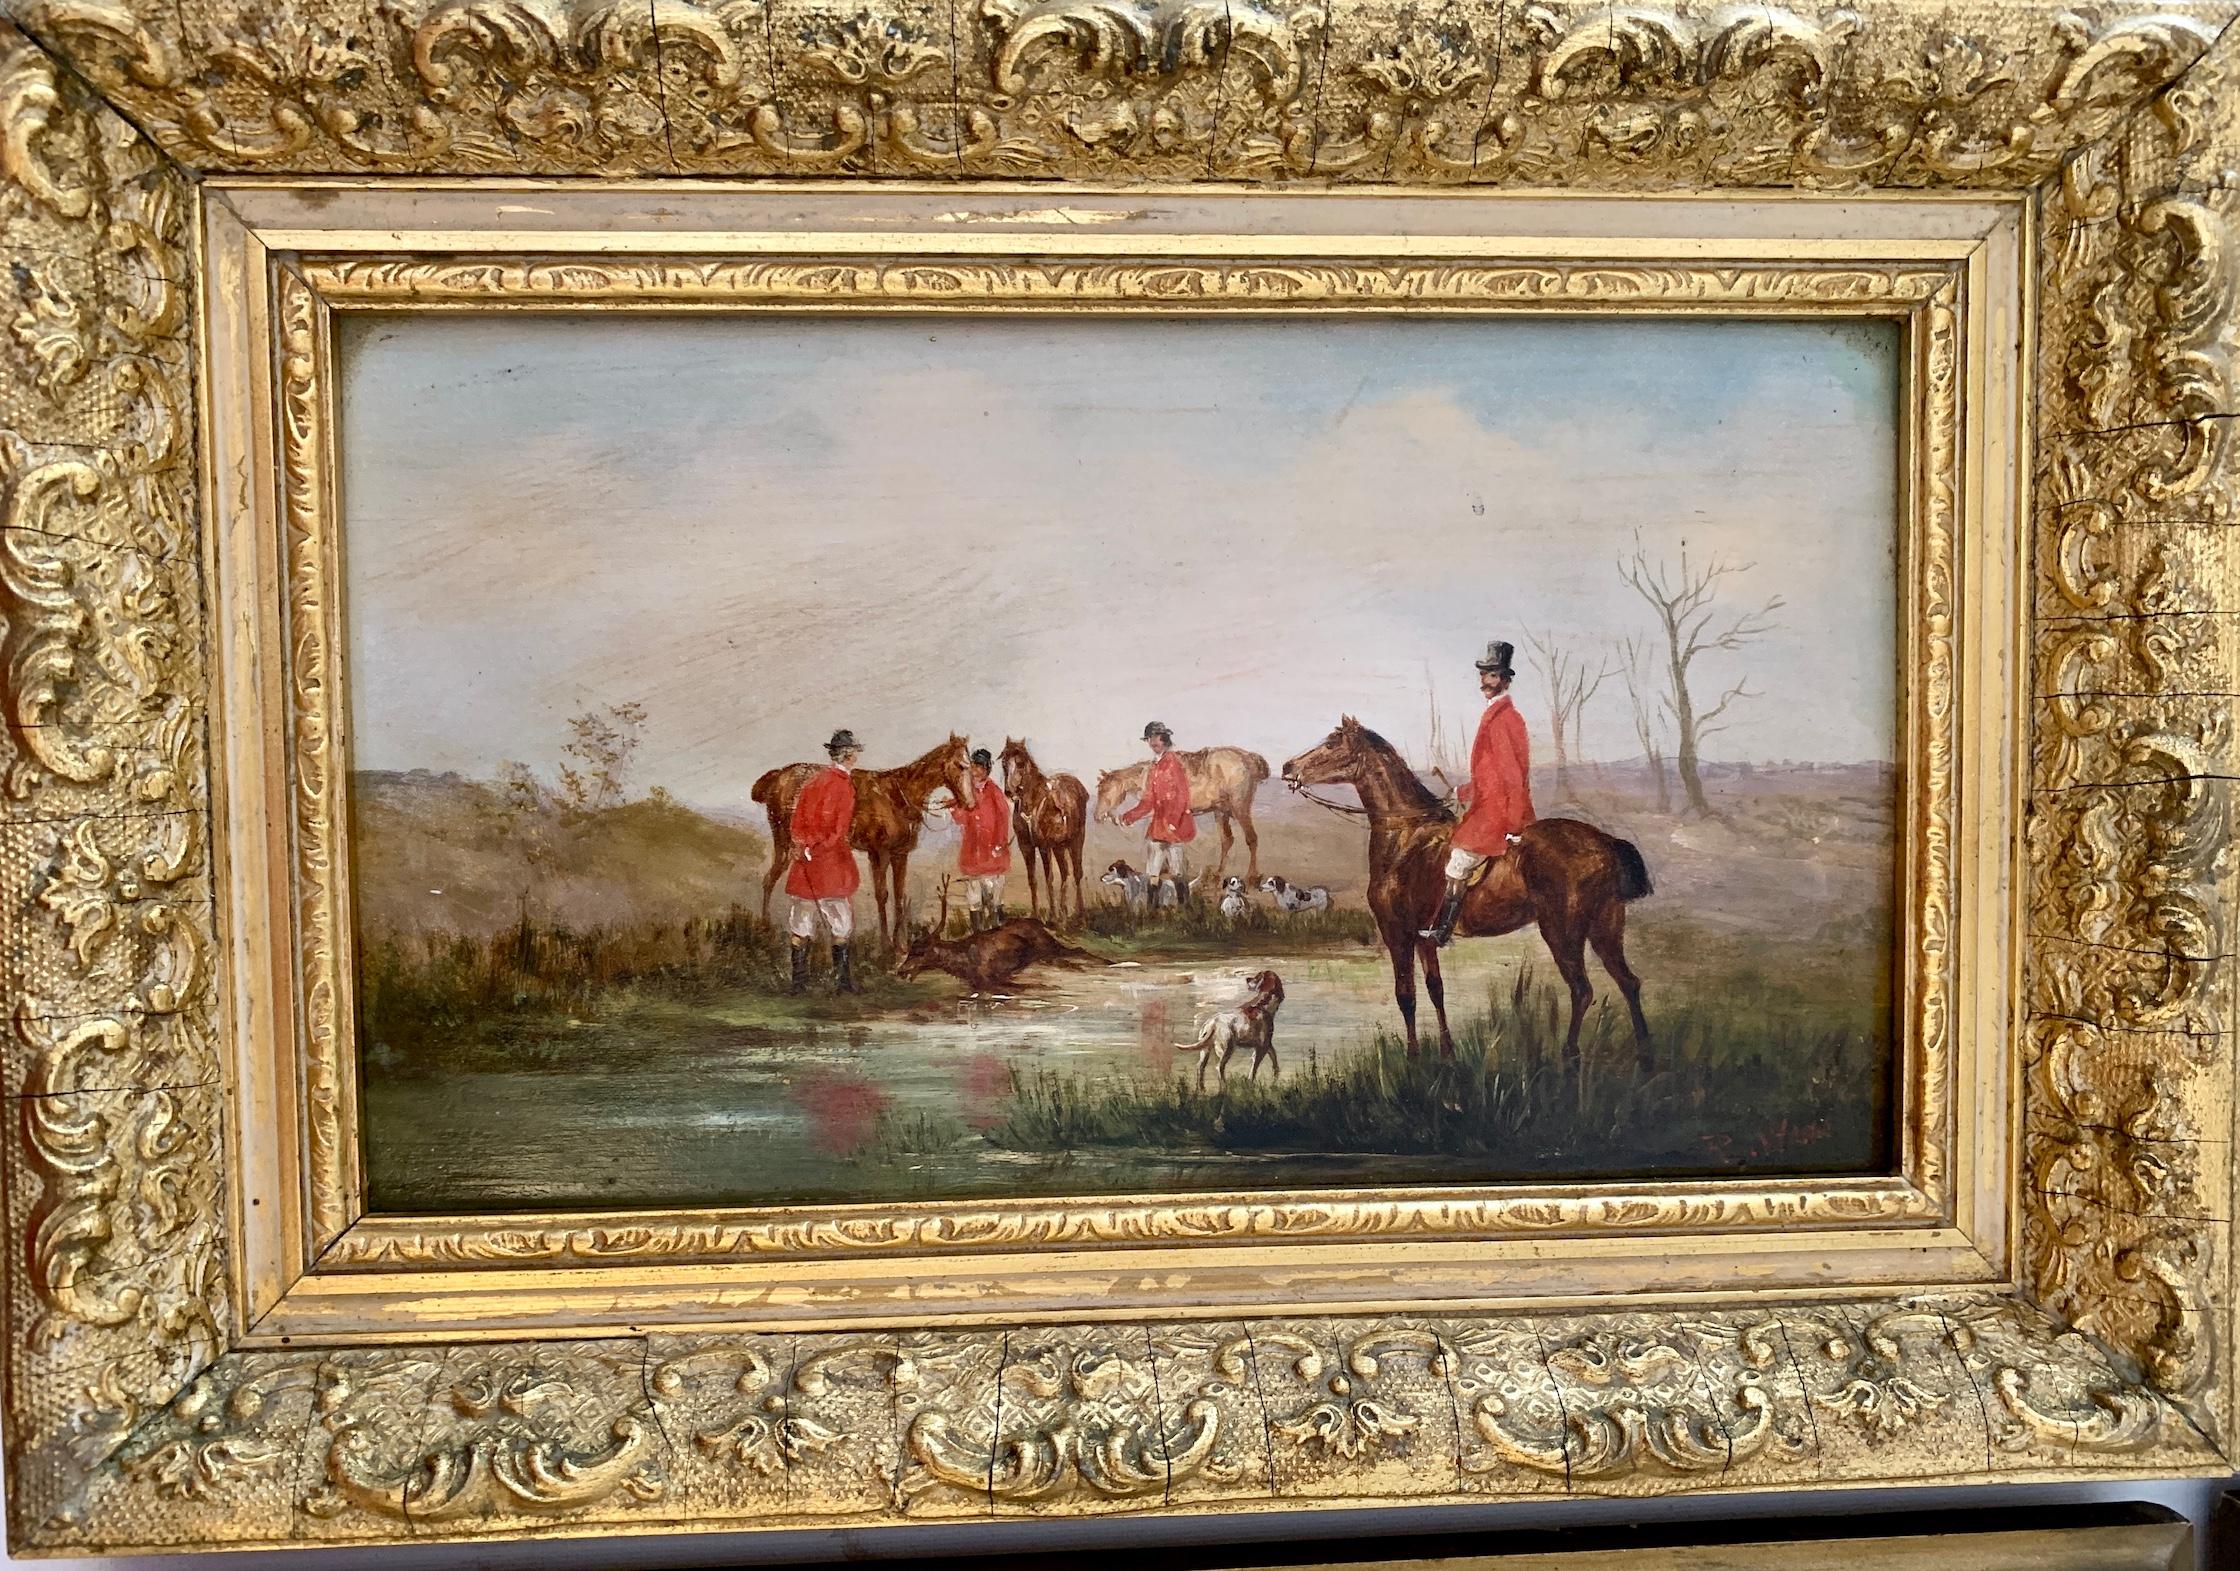 19th century Set of 4 Fox hunting scenes in a landscape, with hounds, huntsmen - Painting by Rudolph Stone